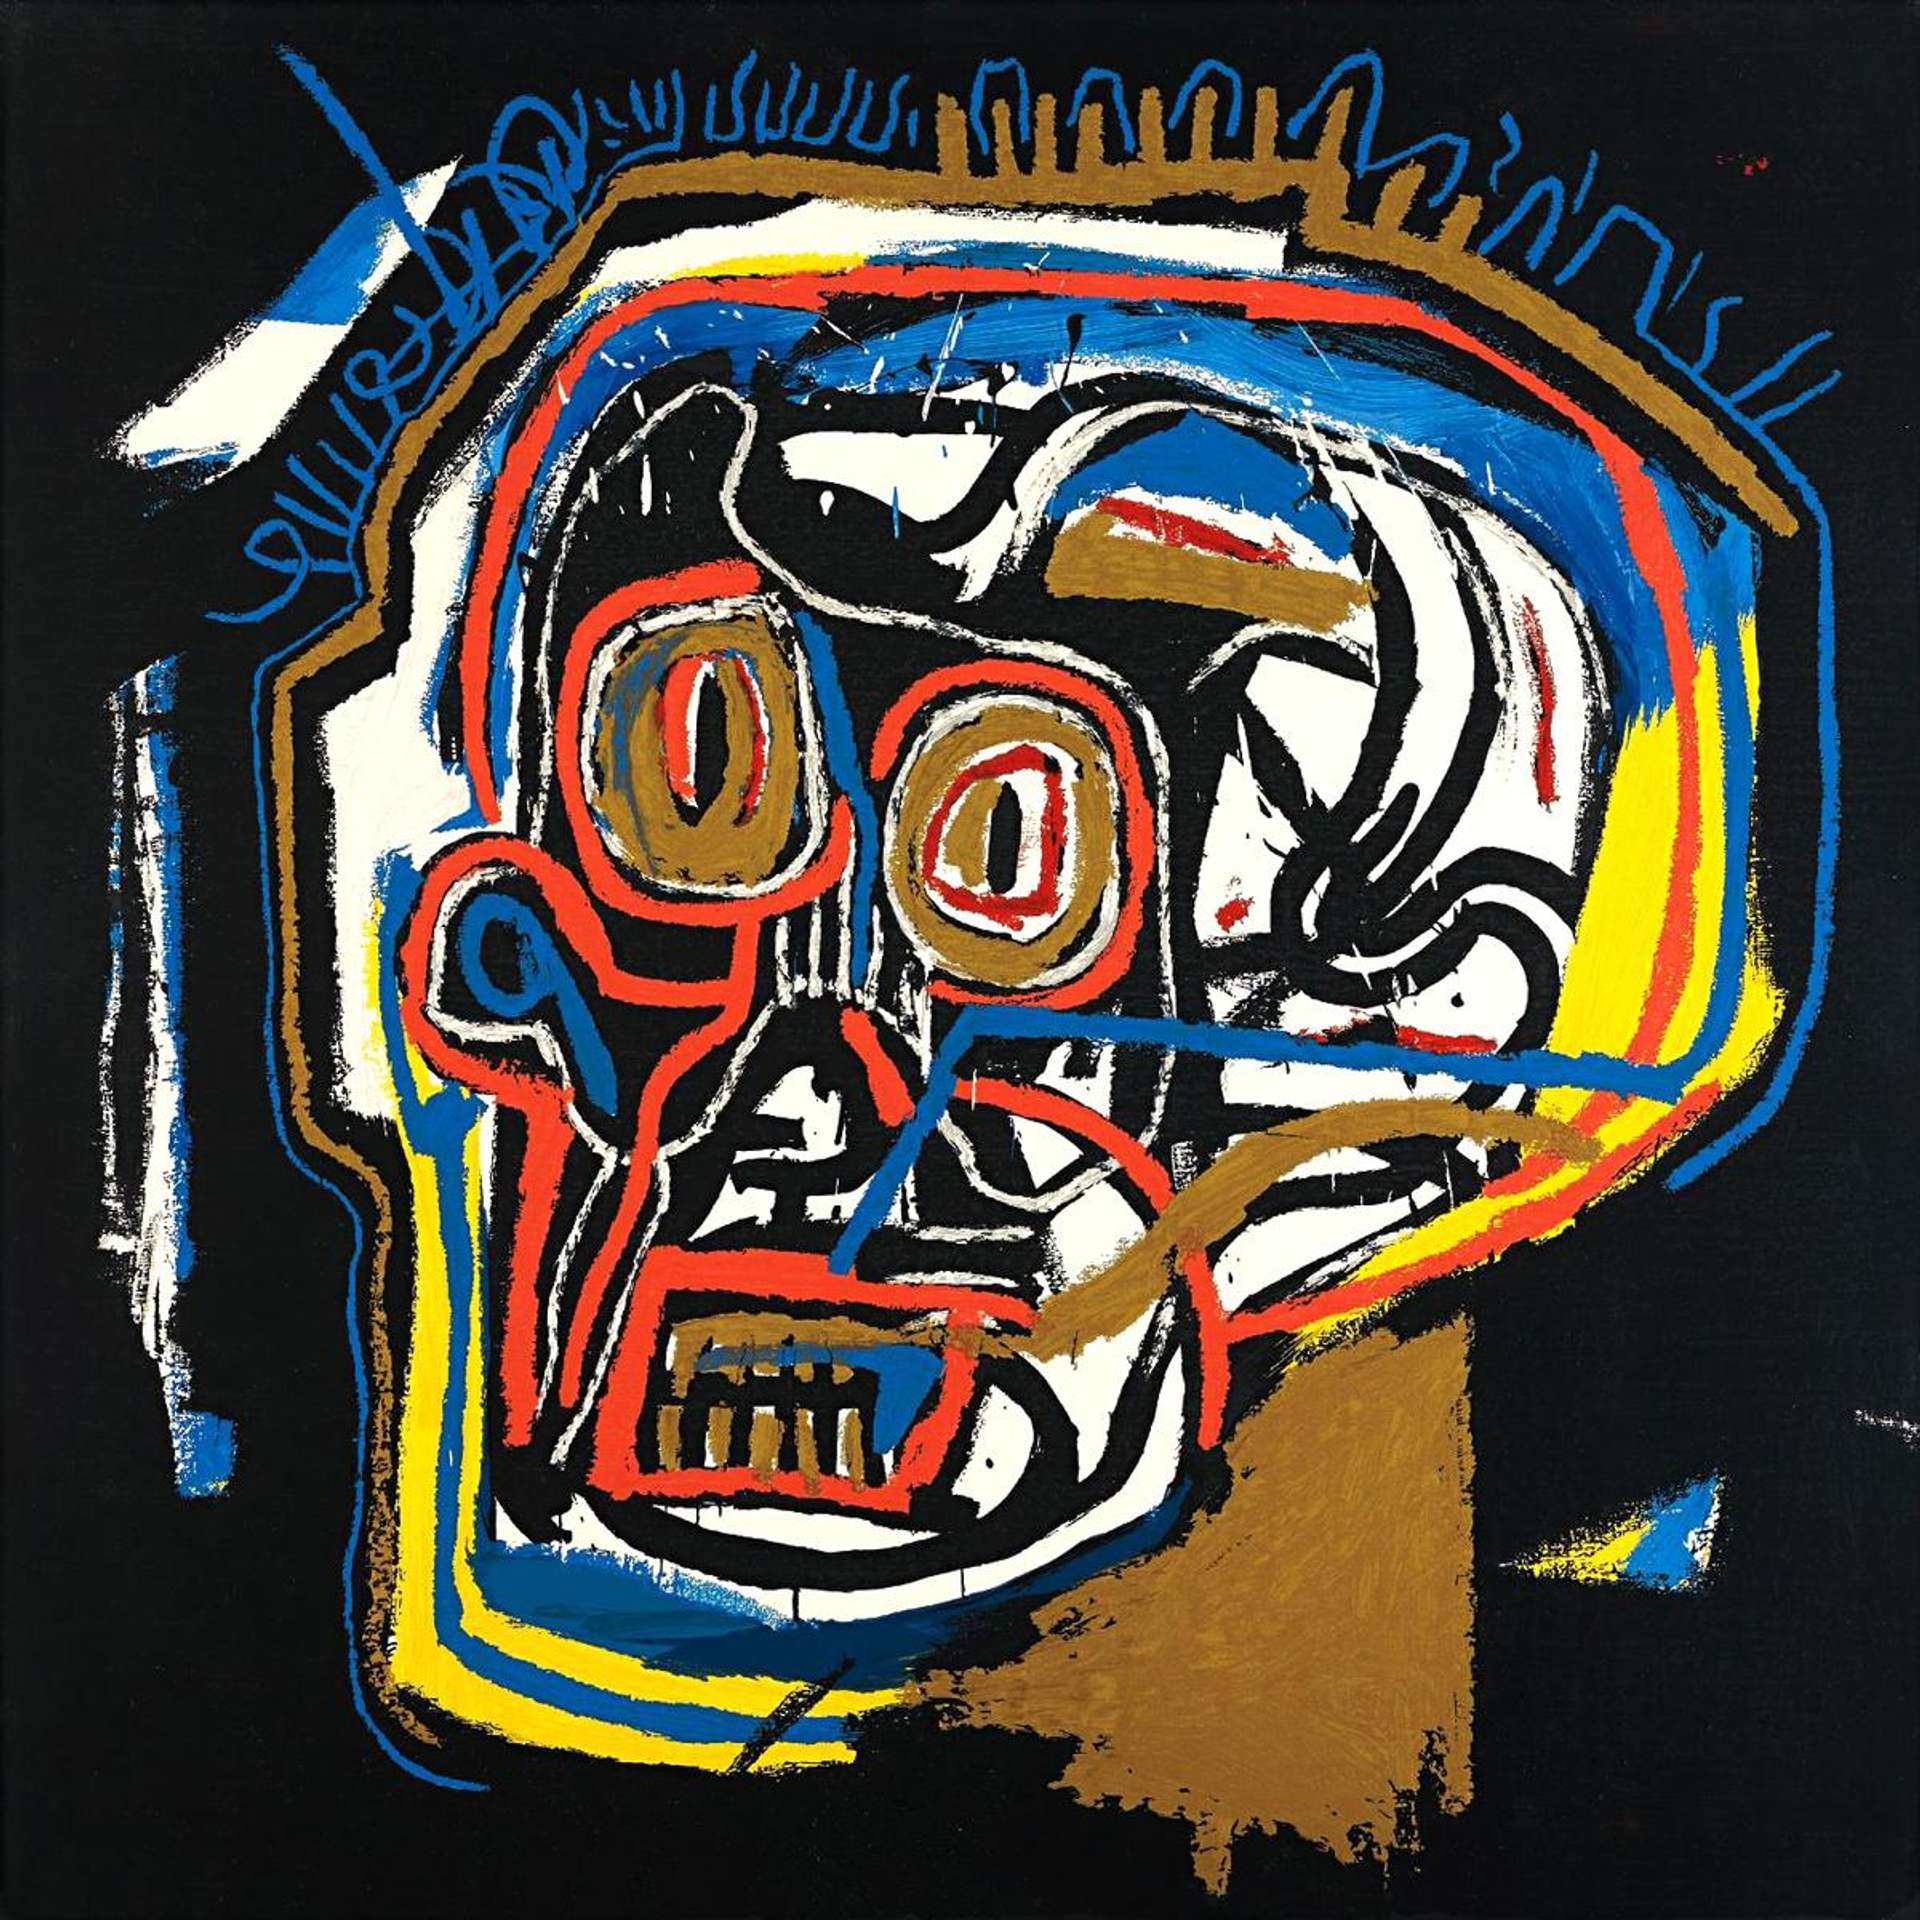 An image of the artwork Head by Basquiat. It shows a stylised skull, depicted in red, yellow and blue against a black background. Basquiat’s energetic brushstrokes are particularly visible.